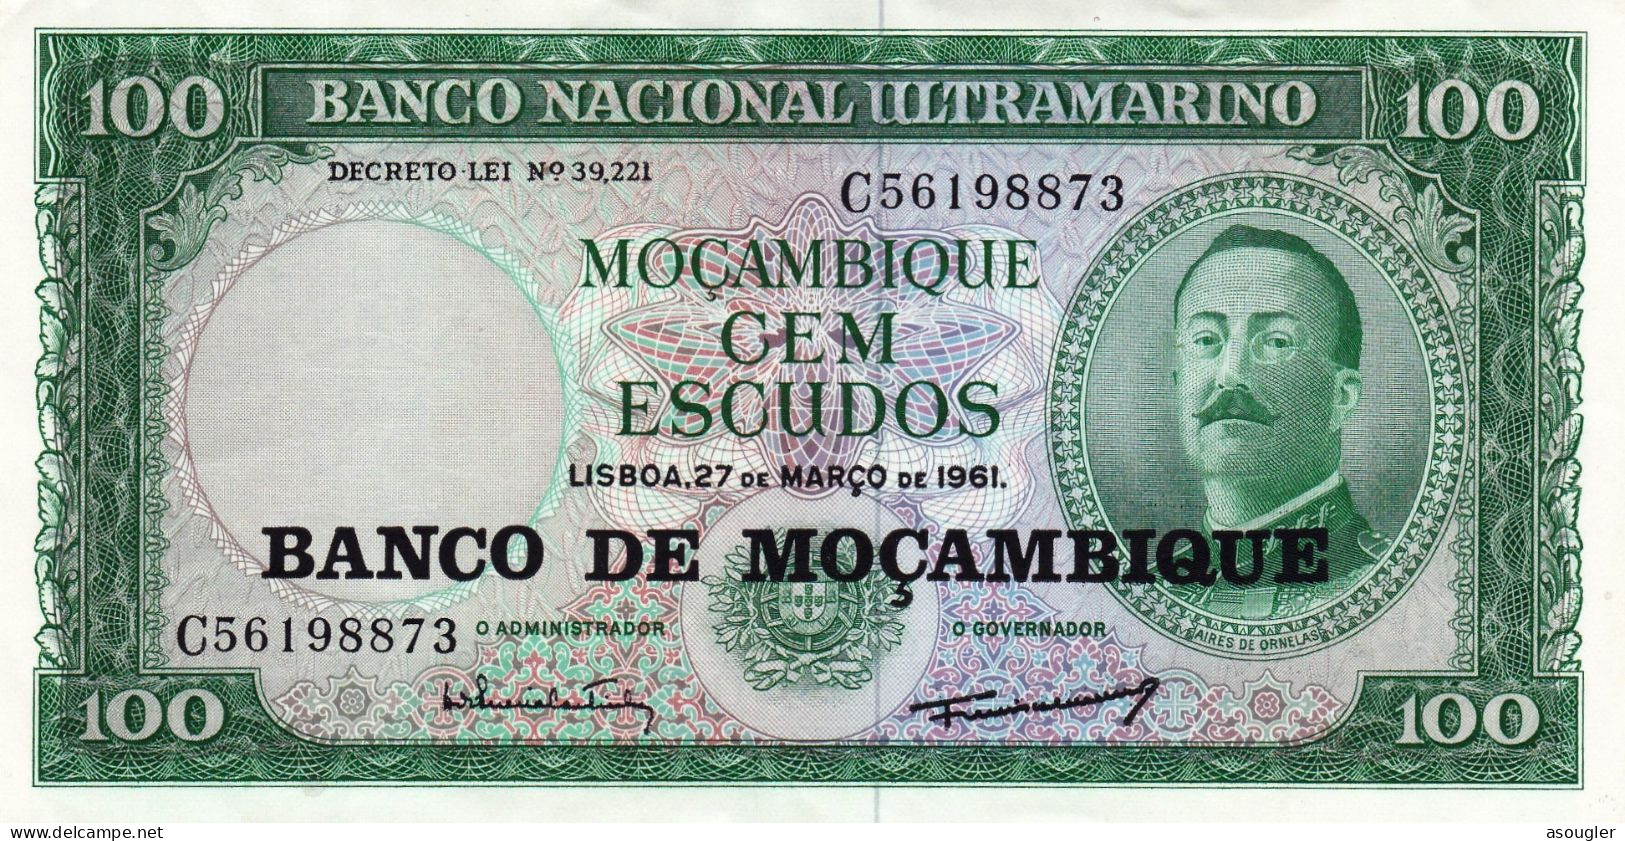 Mozambique 100 Escudos ND (1976 - Old Date 27.3.1961) UNC P-117a "free Shipping Via Regular Air Mail (buyer Risk)" - Mozambique